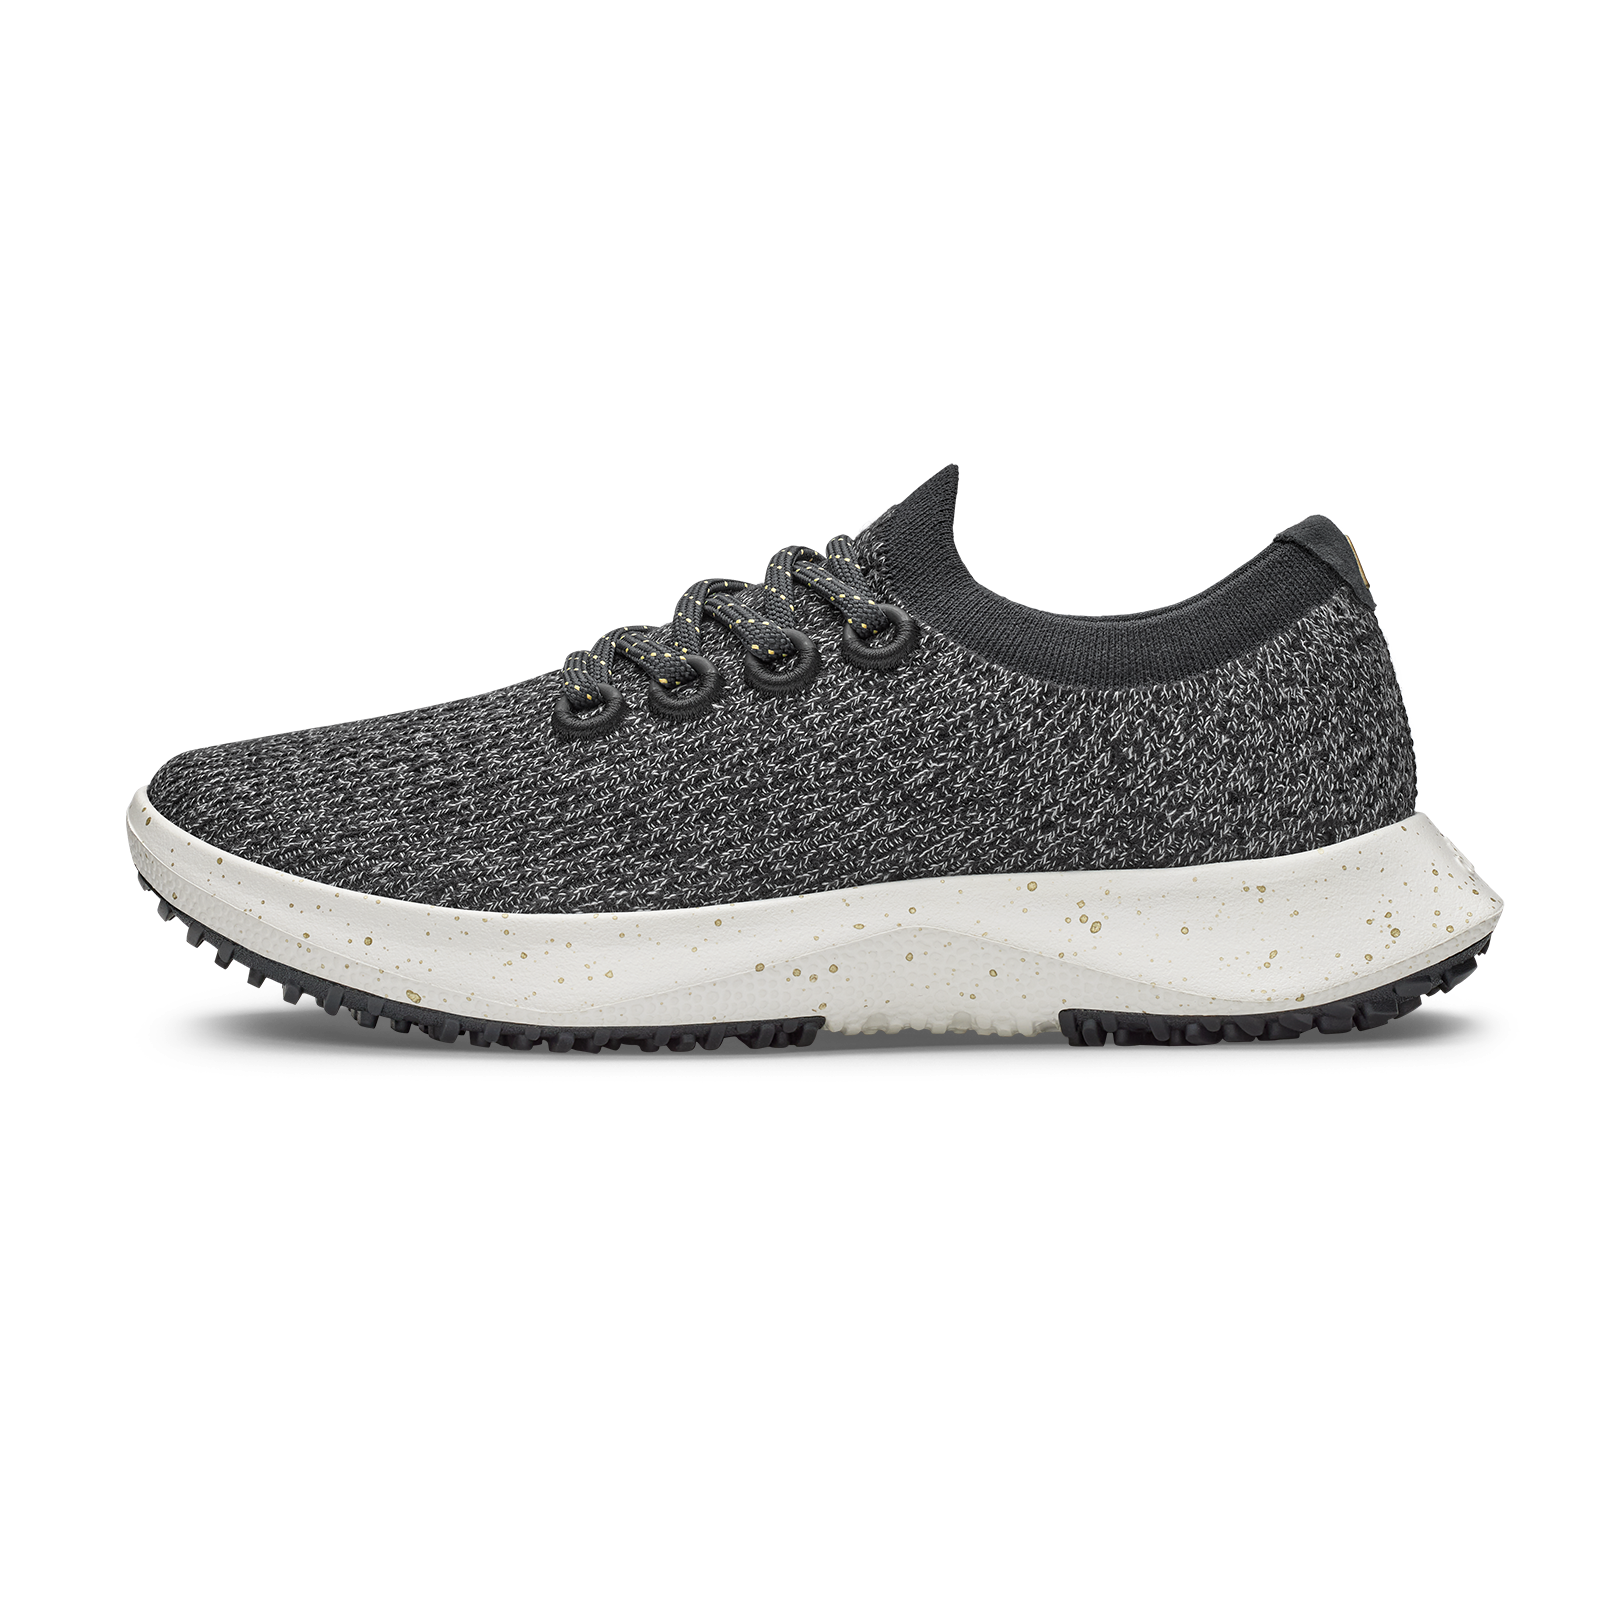 Women's Tree Dasher 2 - Earthly Elements - Natural Black / Blizzard (Blizzard Sole)